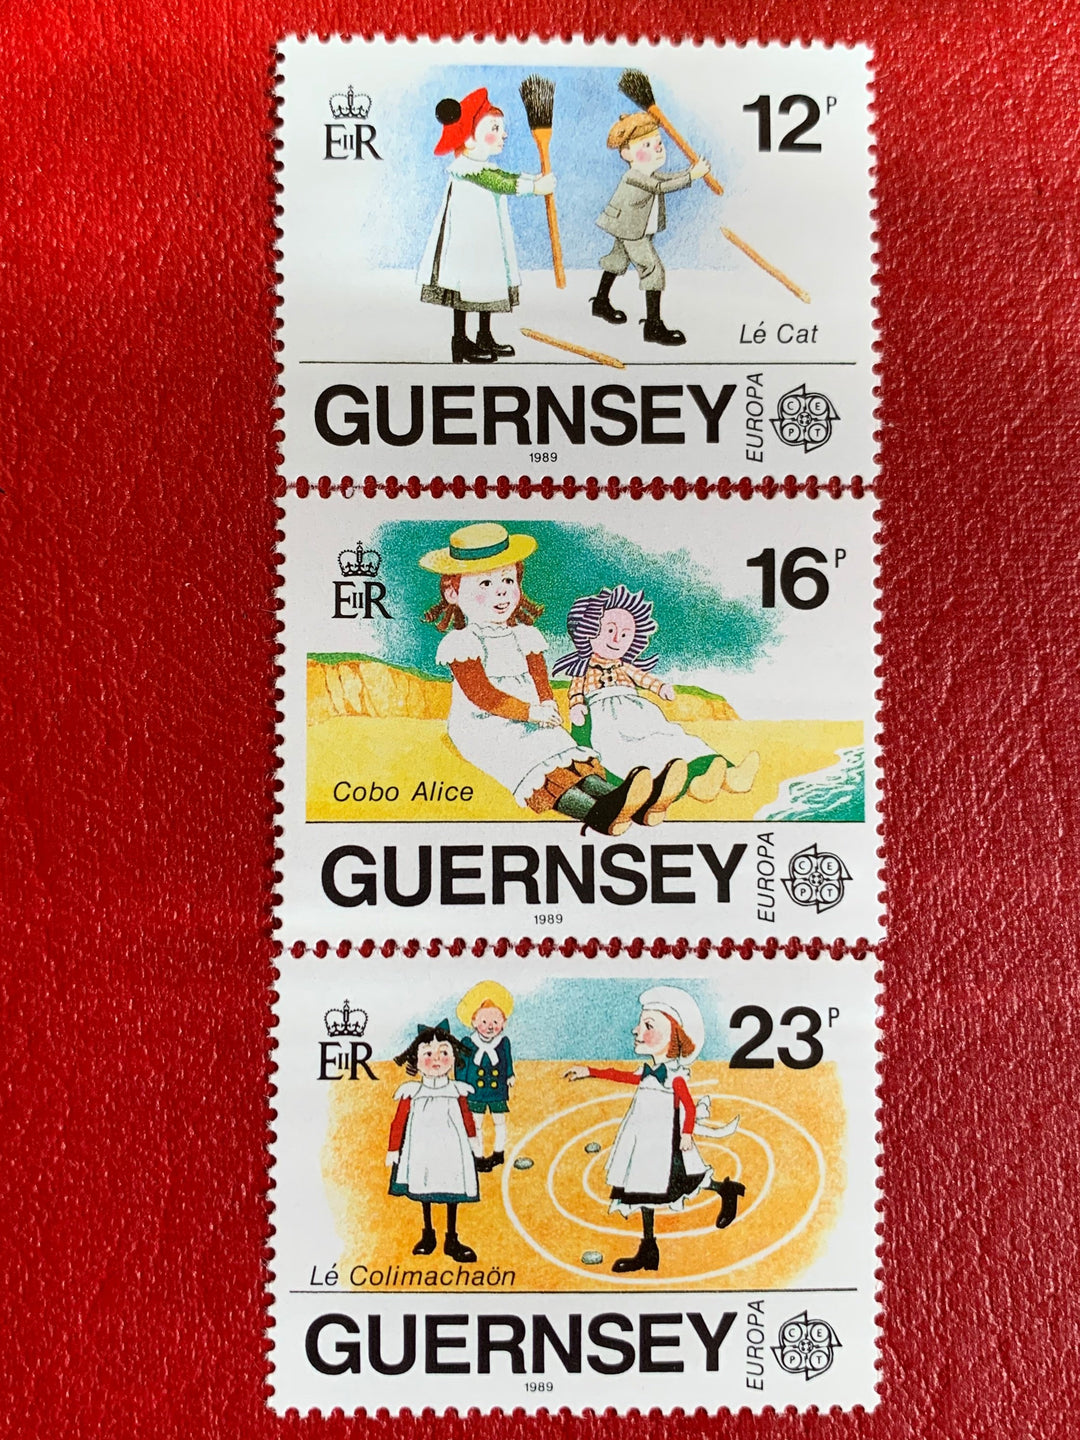 Guernsey - Original Vintage Postage Stamps - 1989 Children’s Toys - for the collector, artist or crafter- decoupage, scrapbooks, journals